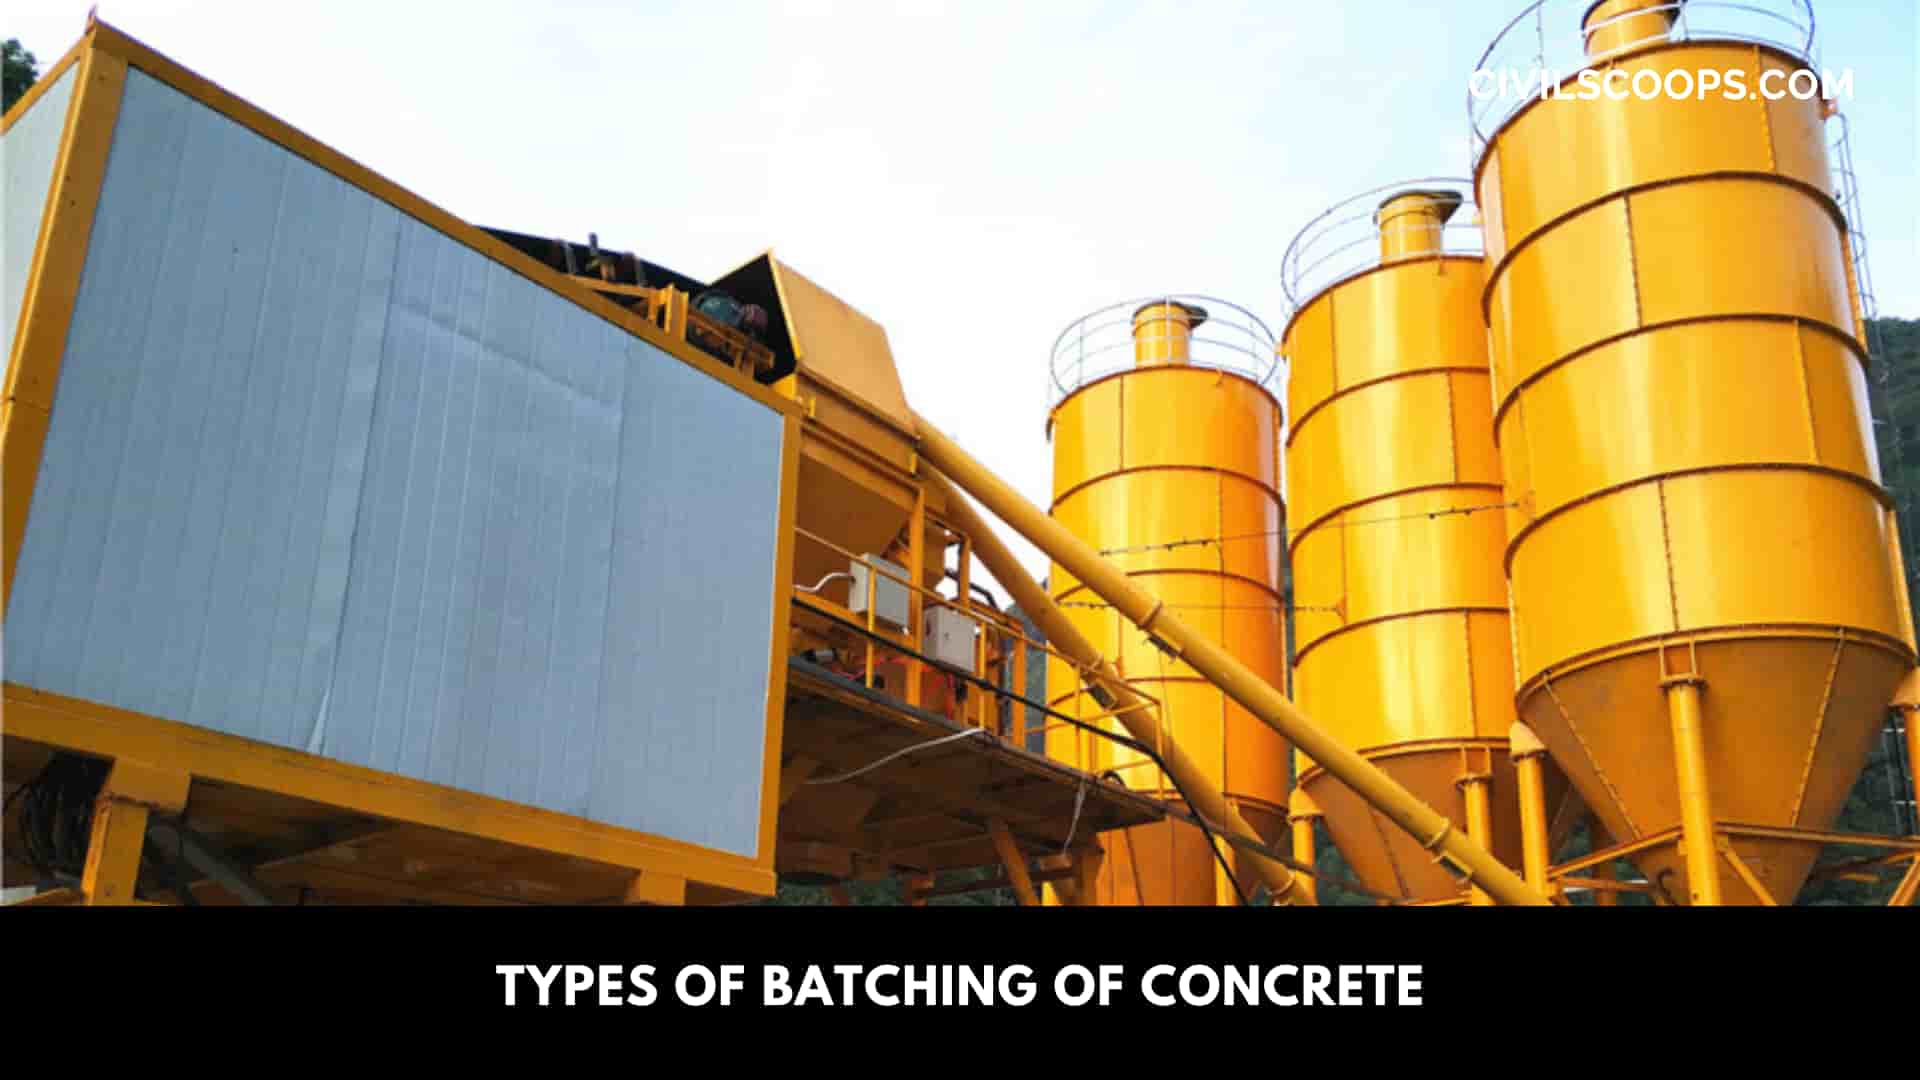 Types of Batching of Concrete